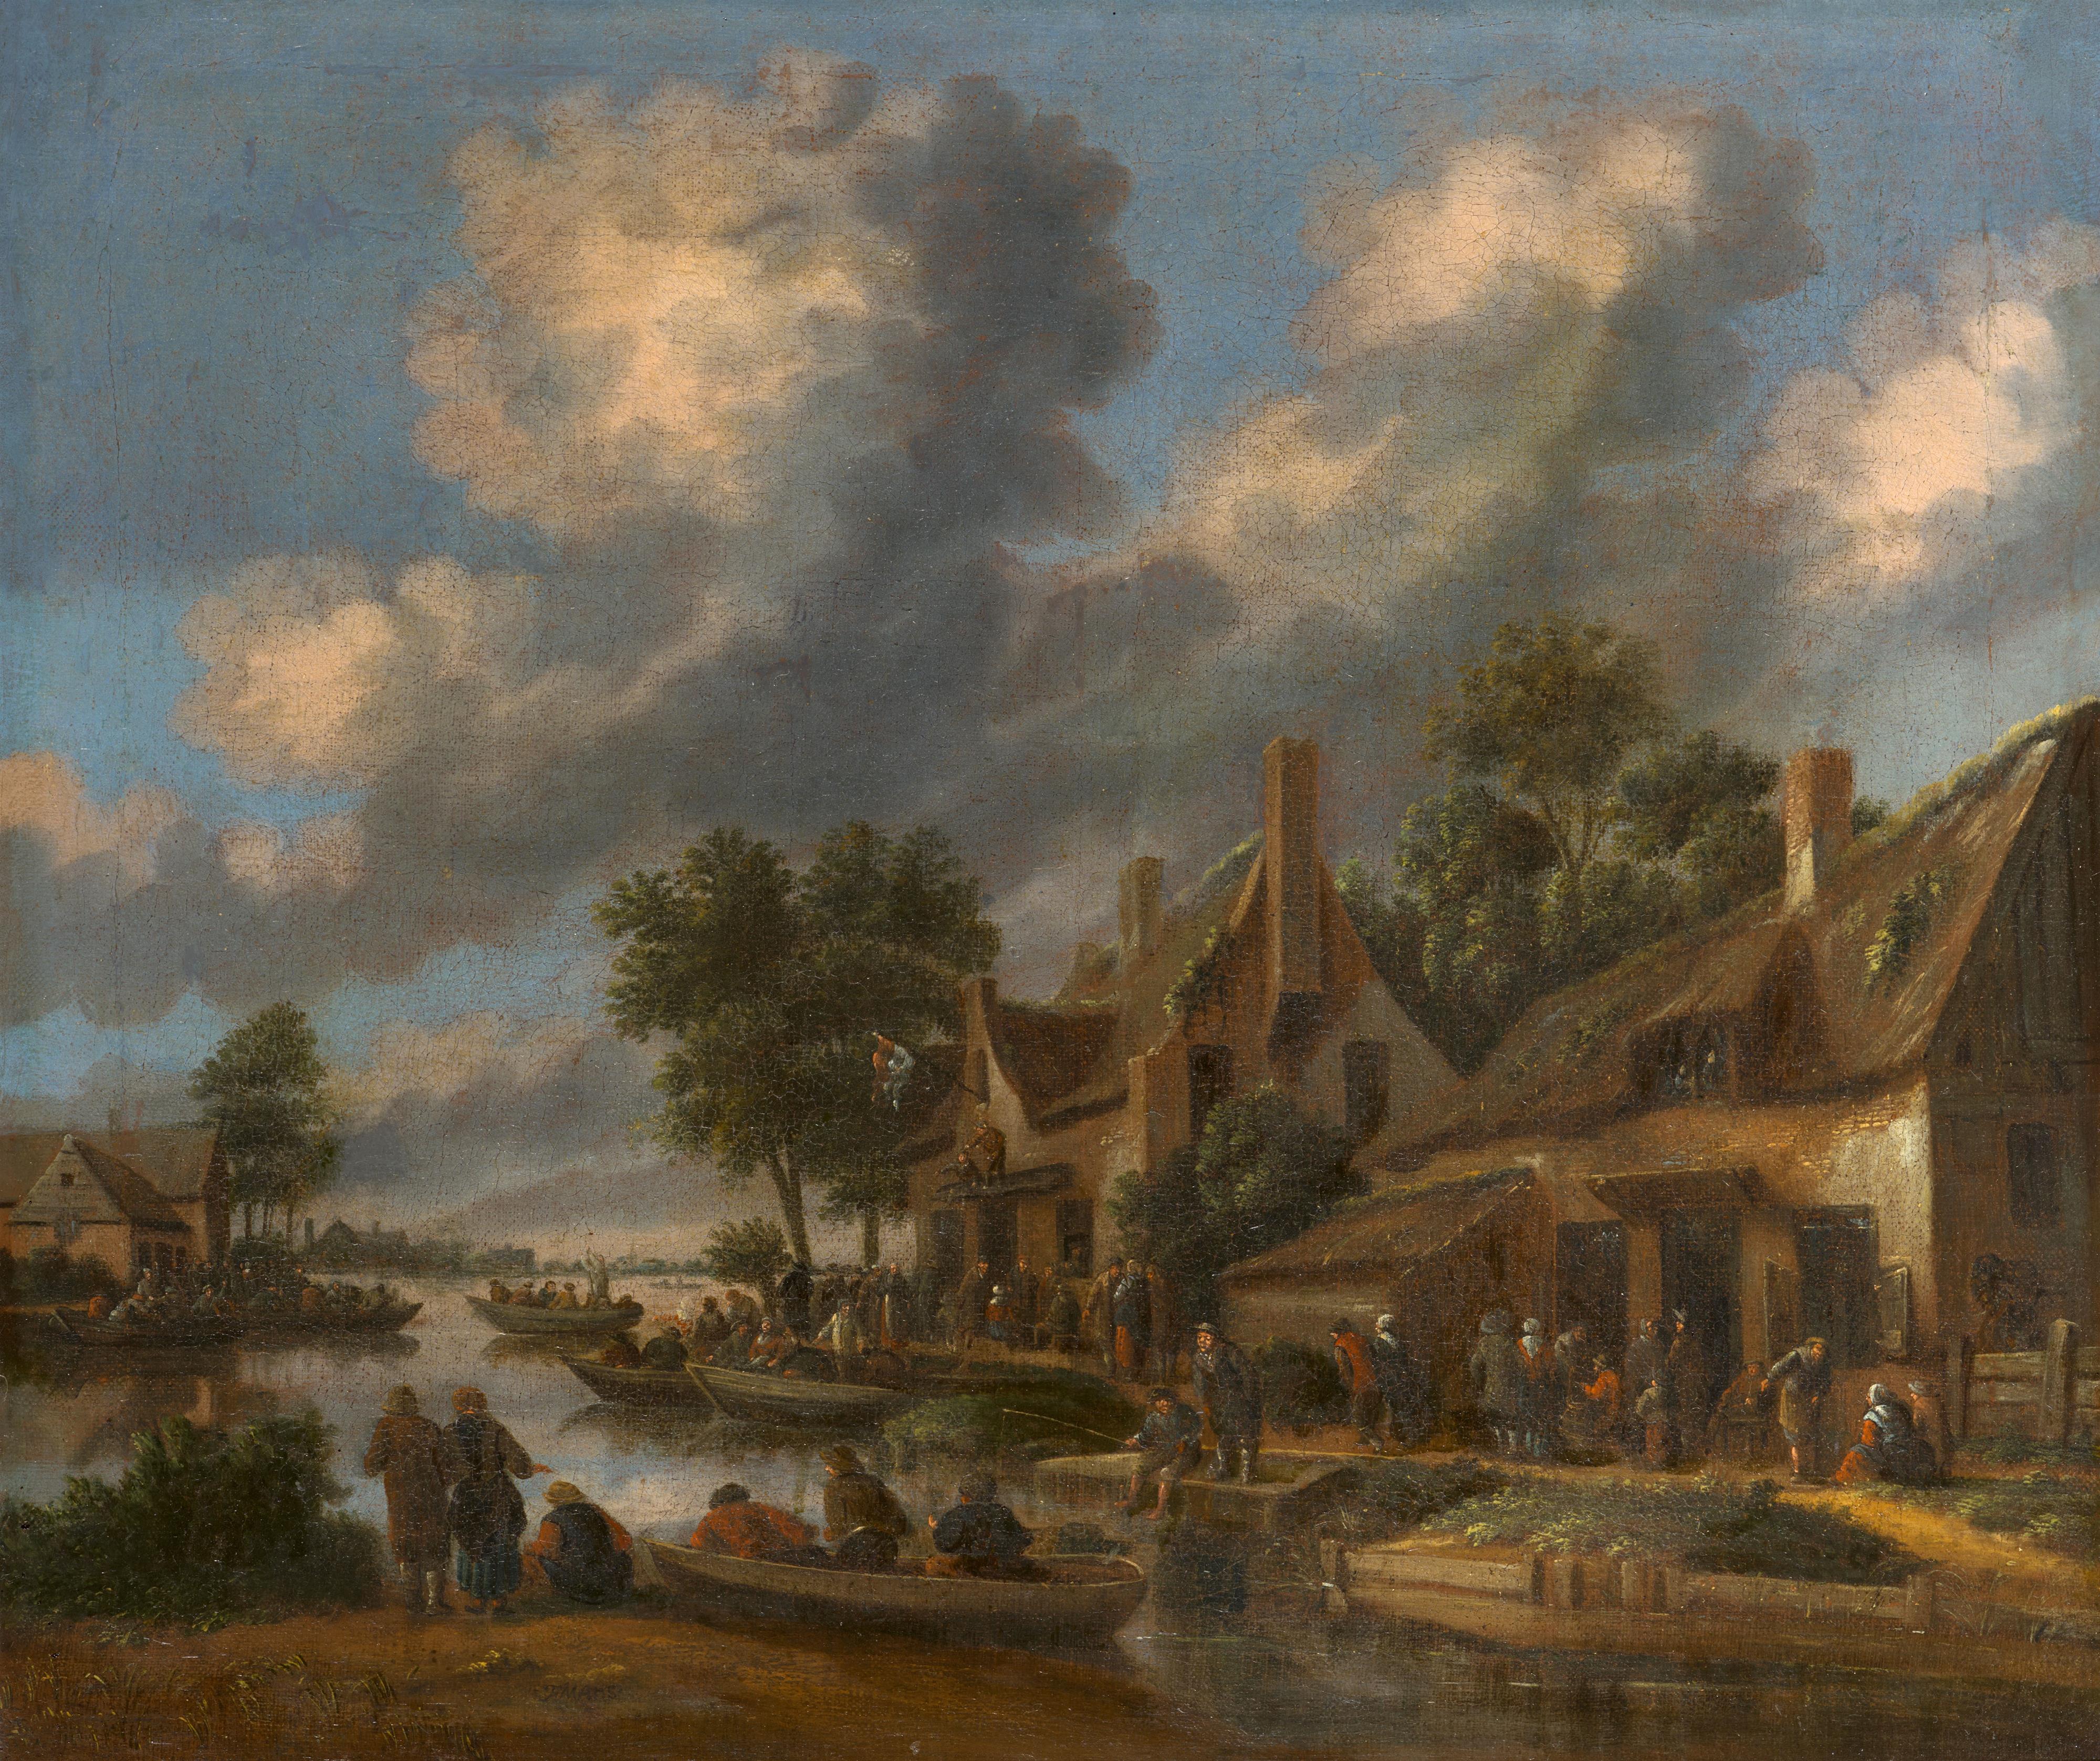 Thomas Heeremans - Peasants and Boats by an Inn on a River Bank - image-1